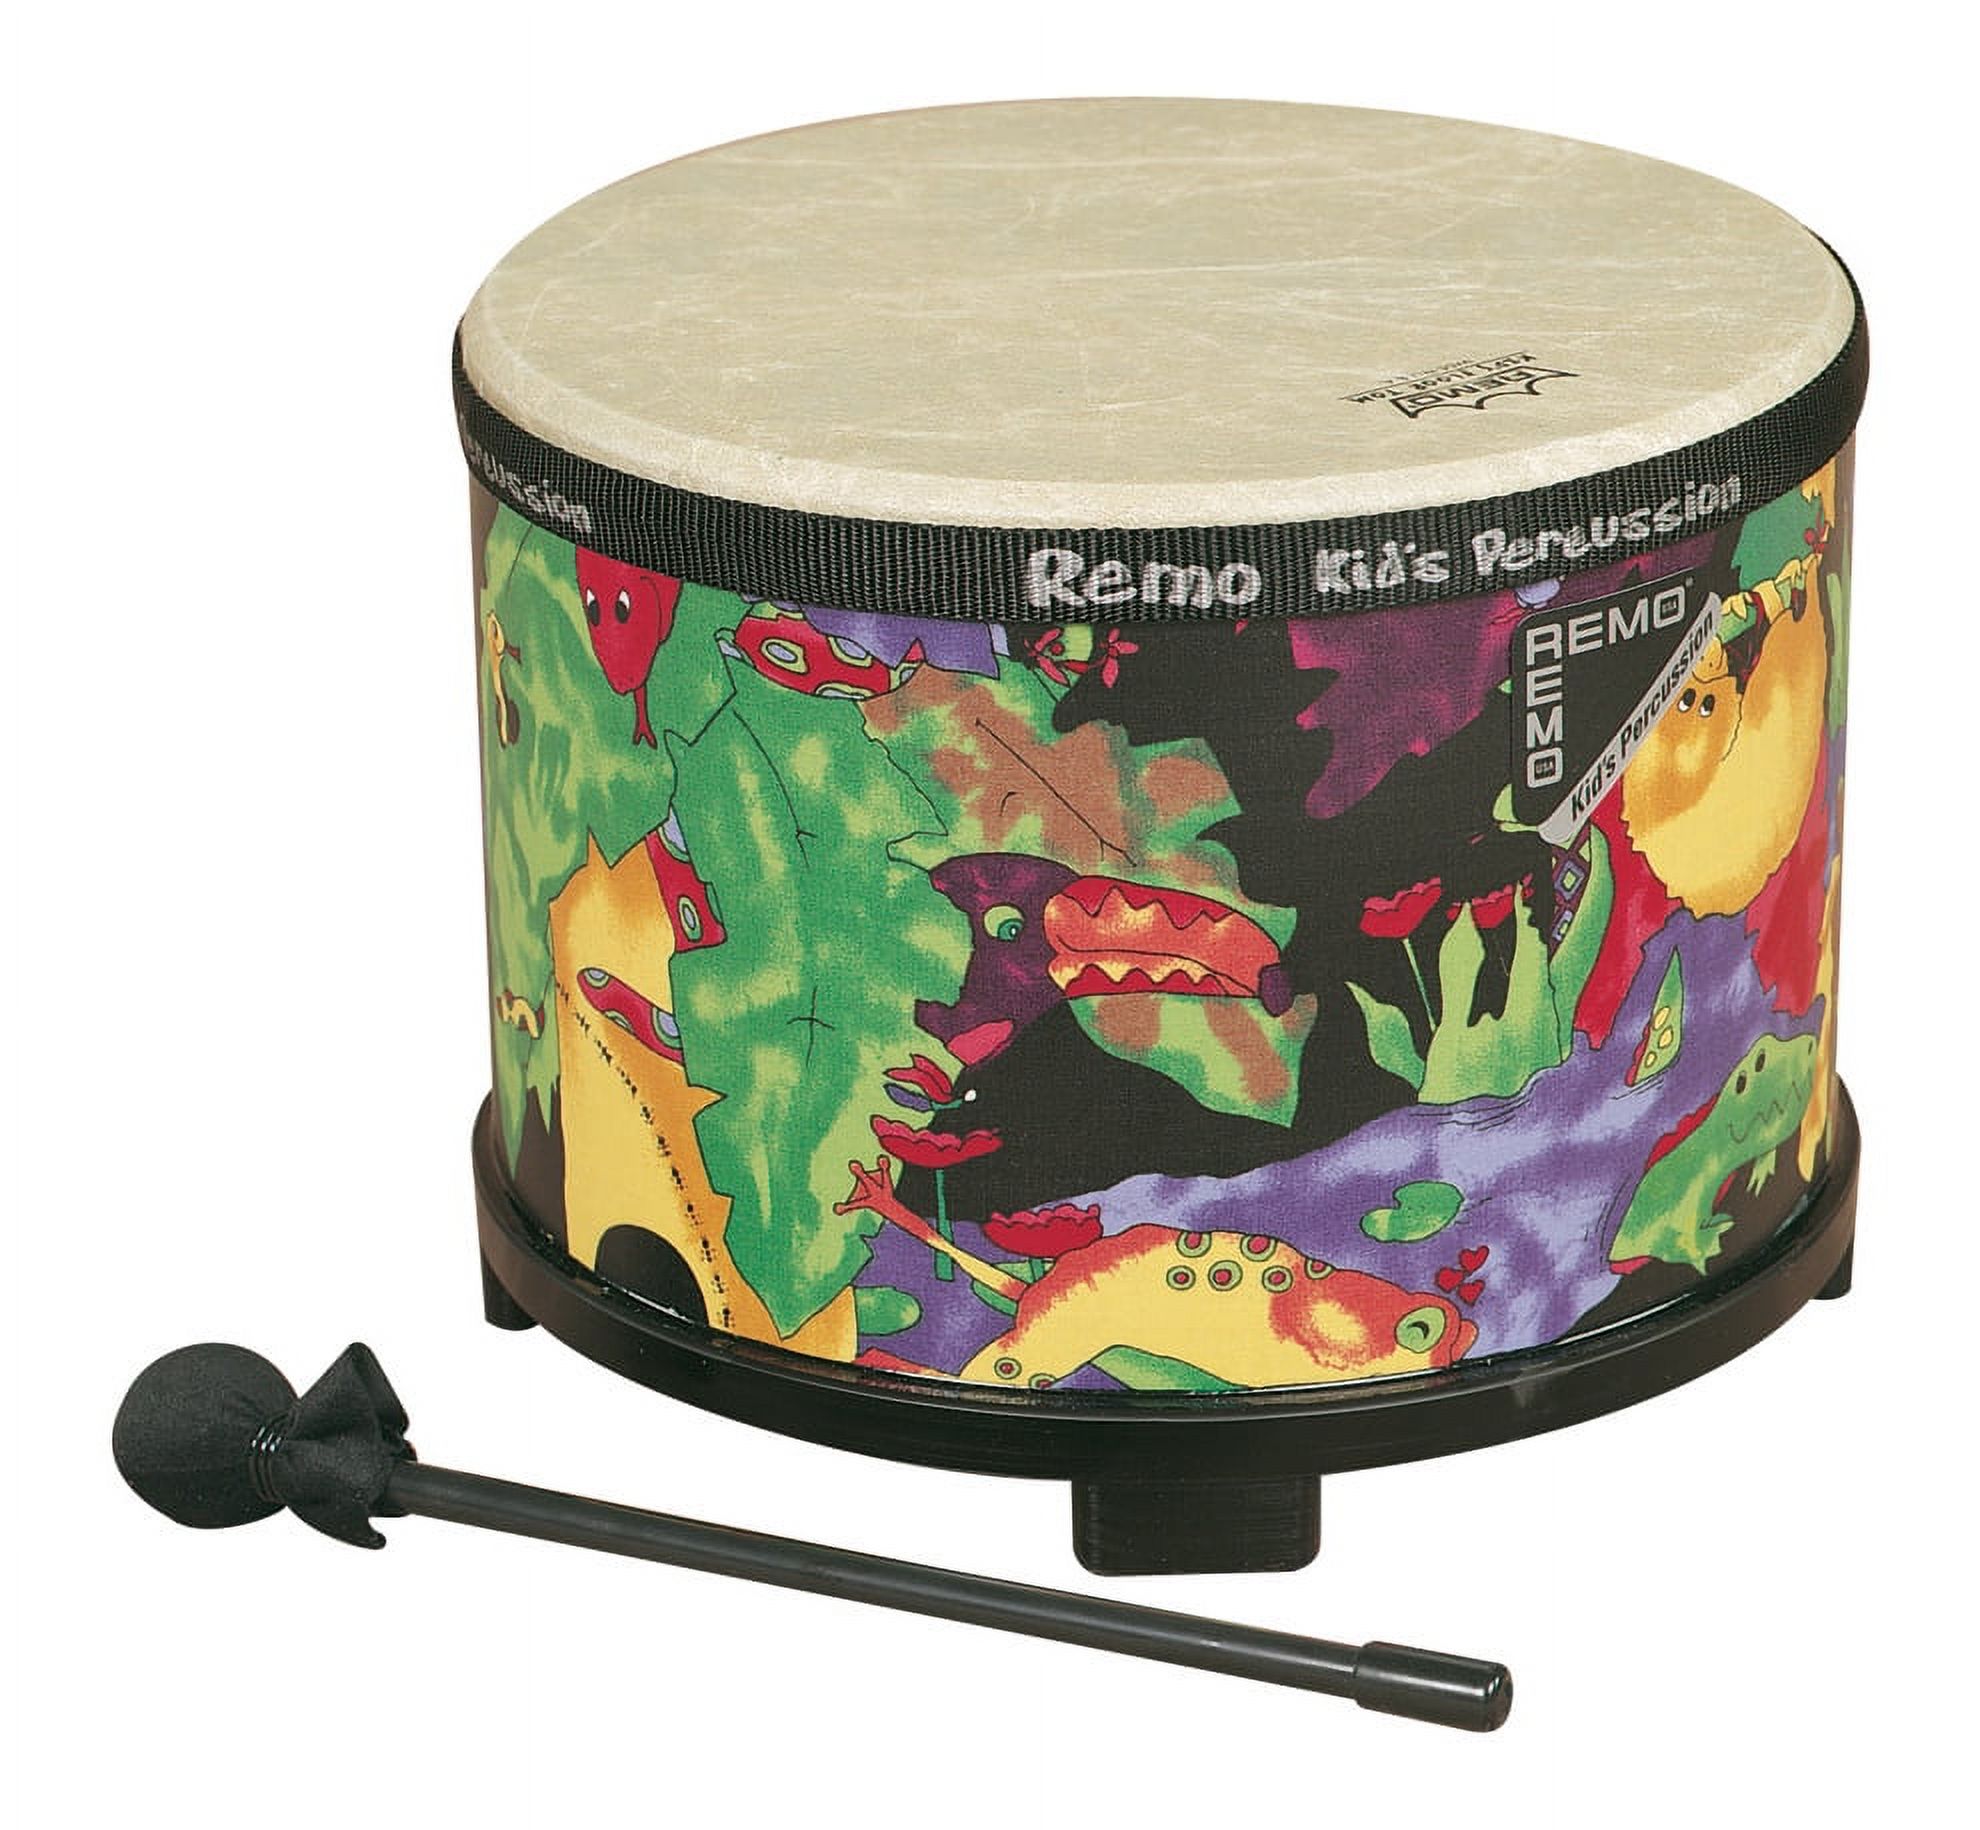 Remo Kids Percussion® Floor Tom Drum Comfort Sound Technology® Rain Forest, 10" - image 1 of 3